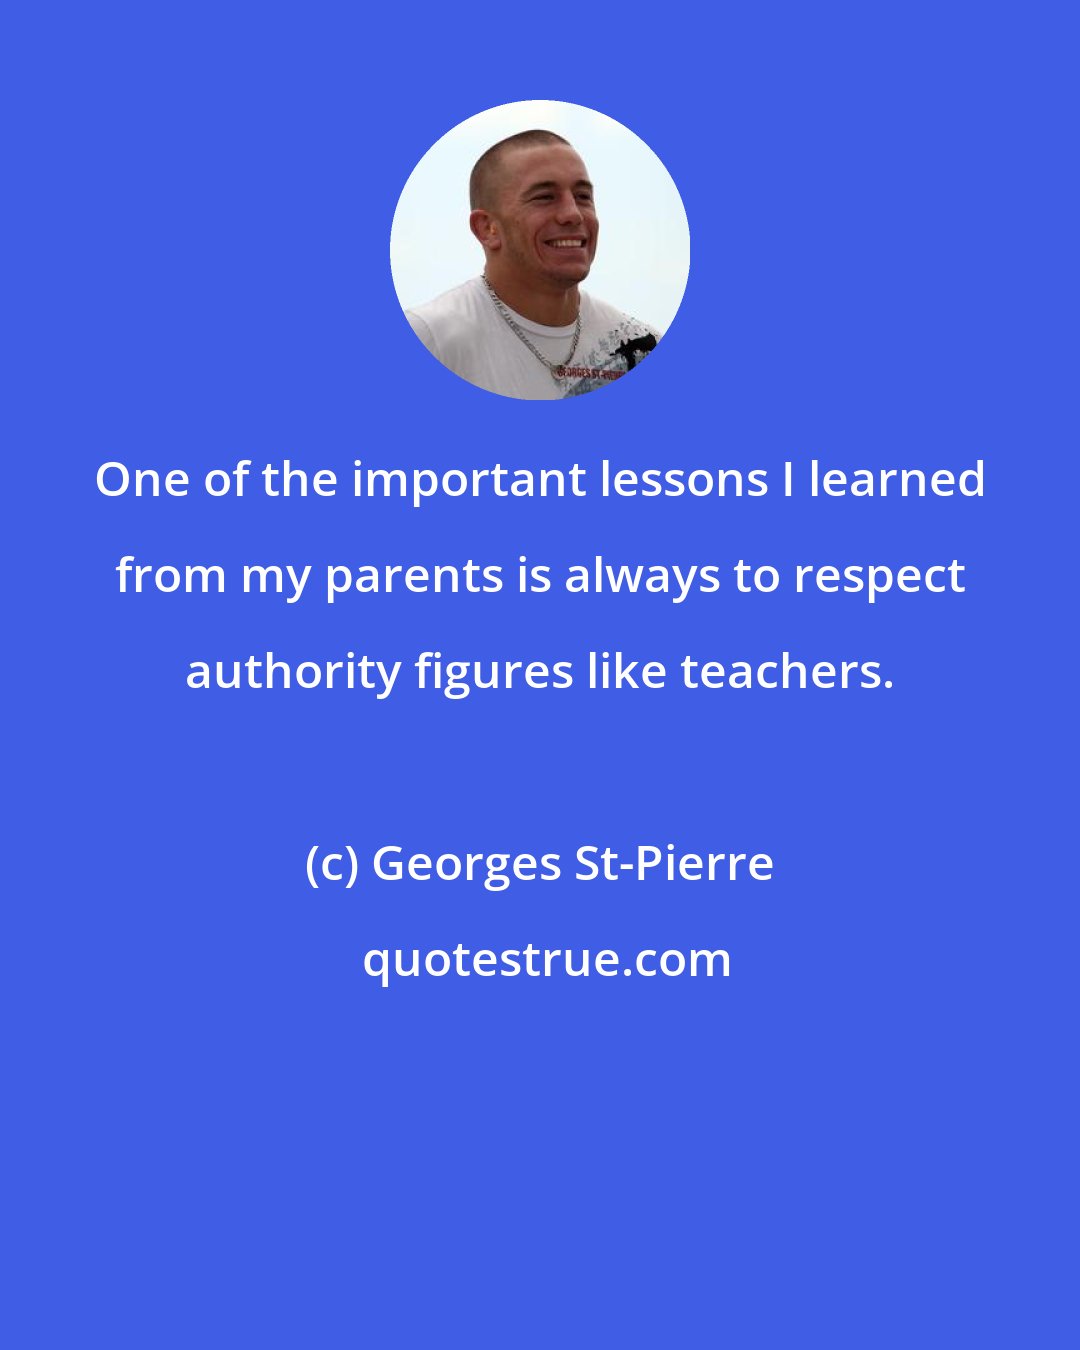 Georges St-Pierre: One of the important lessons I learned from my parents is always to respect authority figures like teachers.